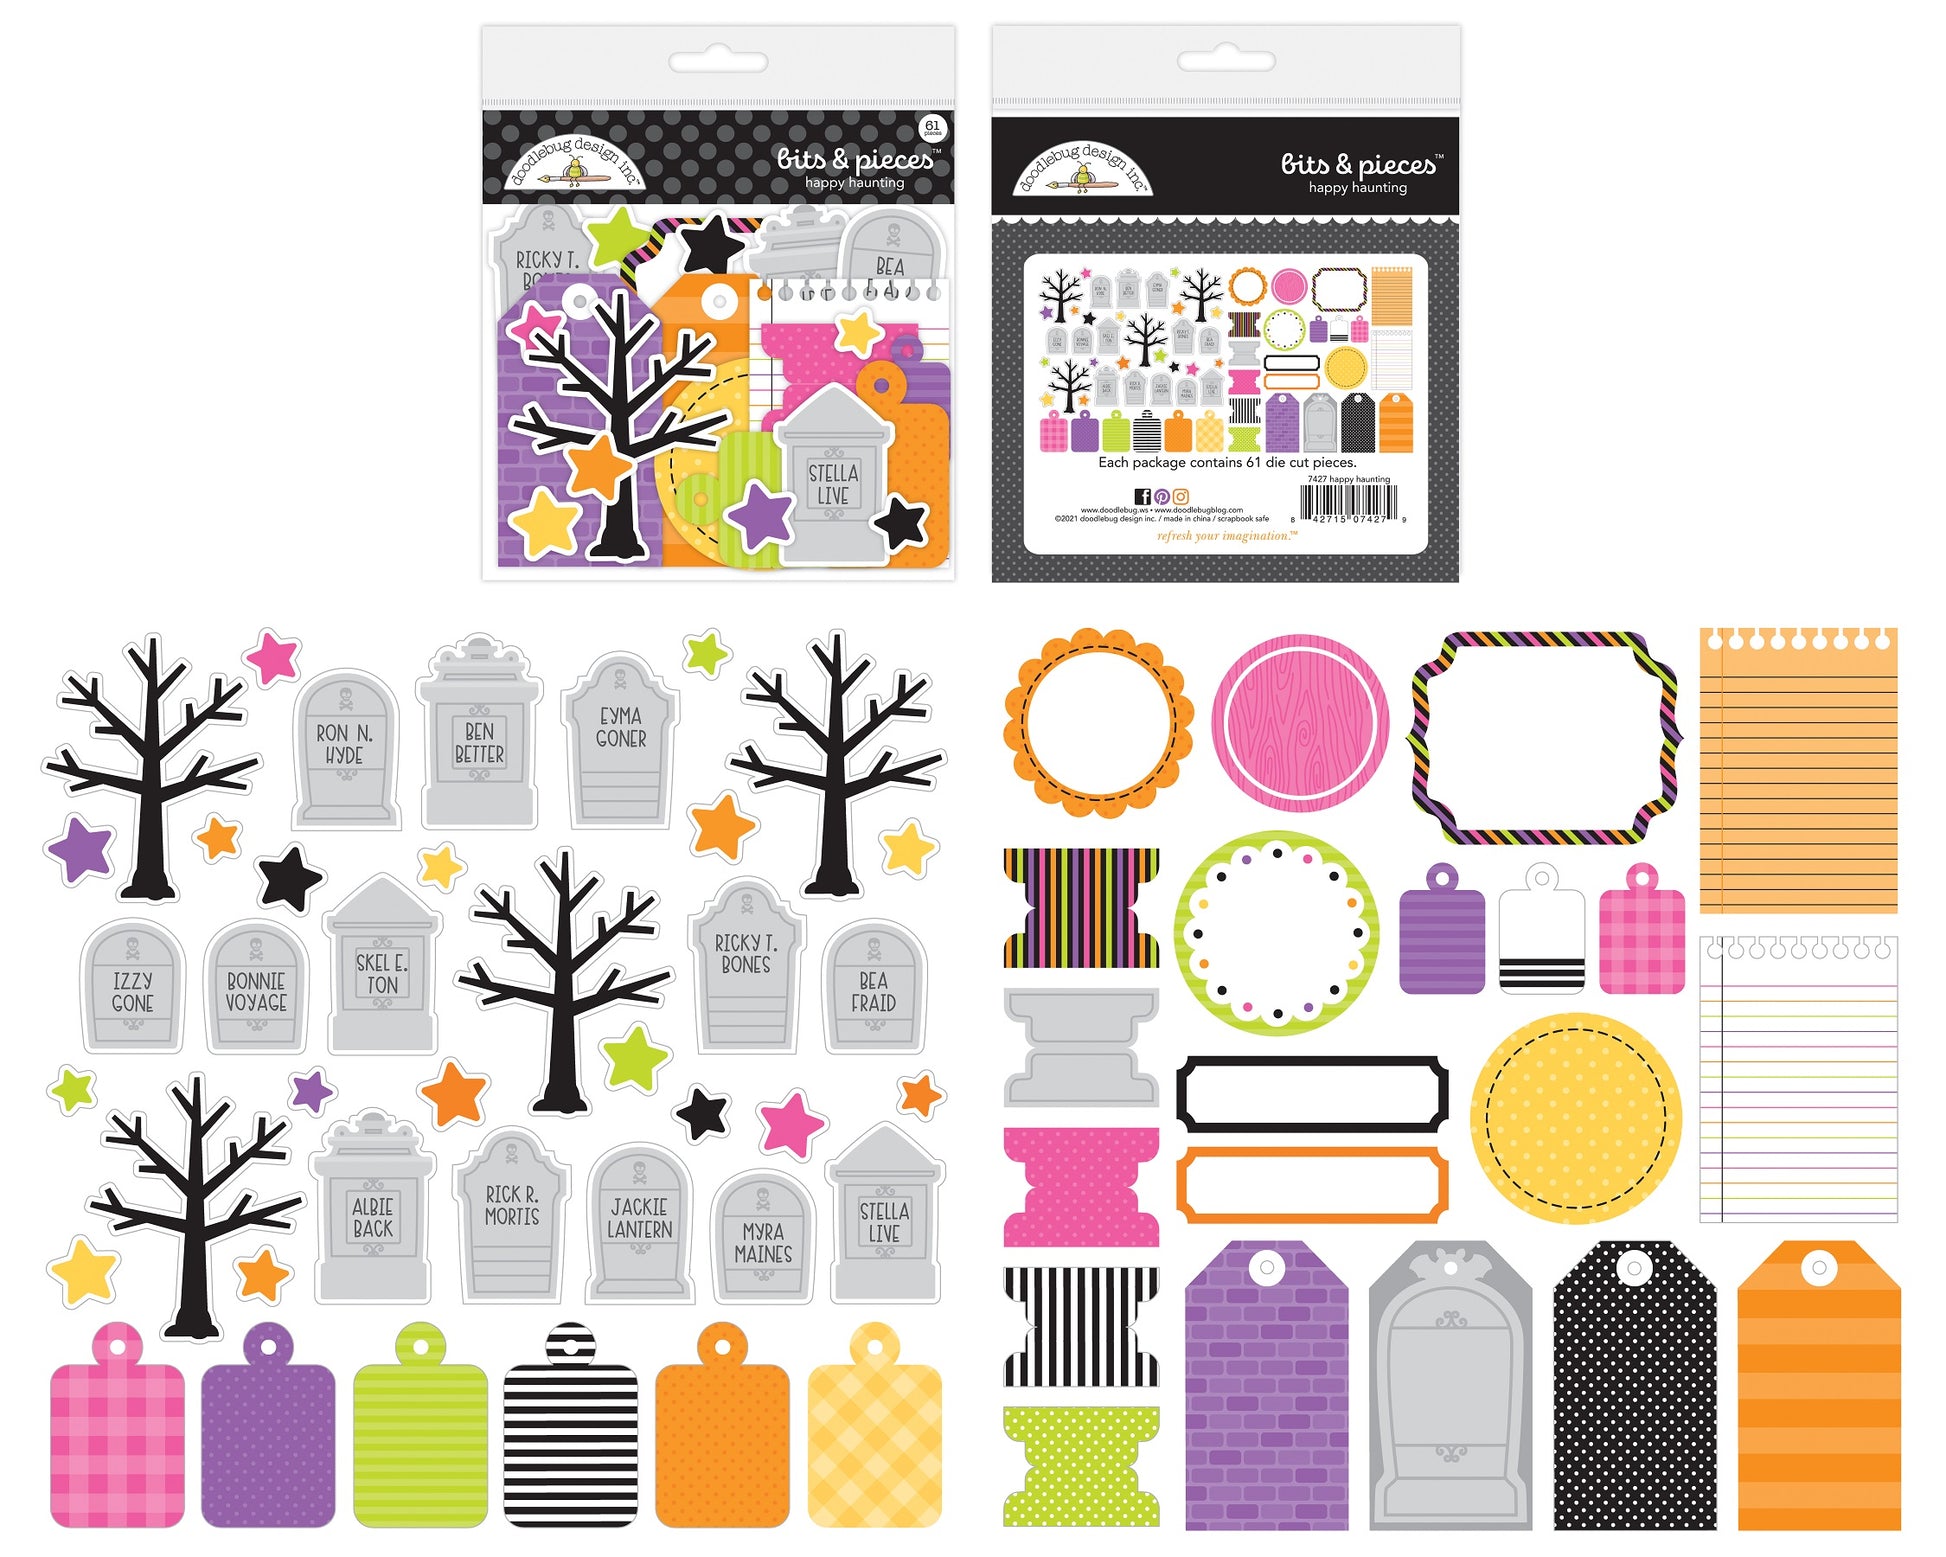 Happy Haunting Bits & Pieces by doodlebug Designs